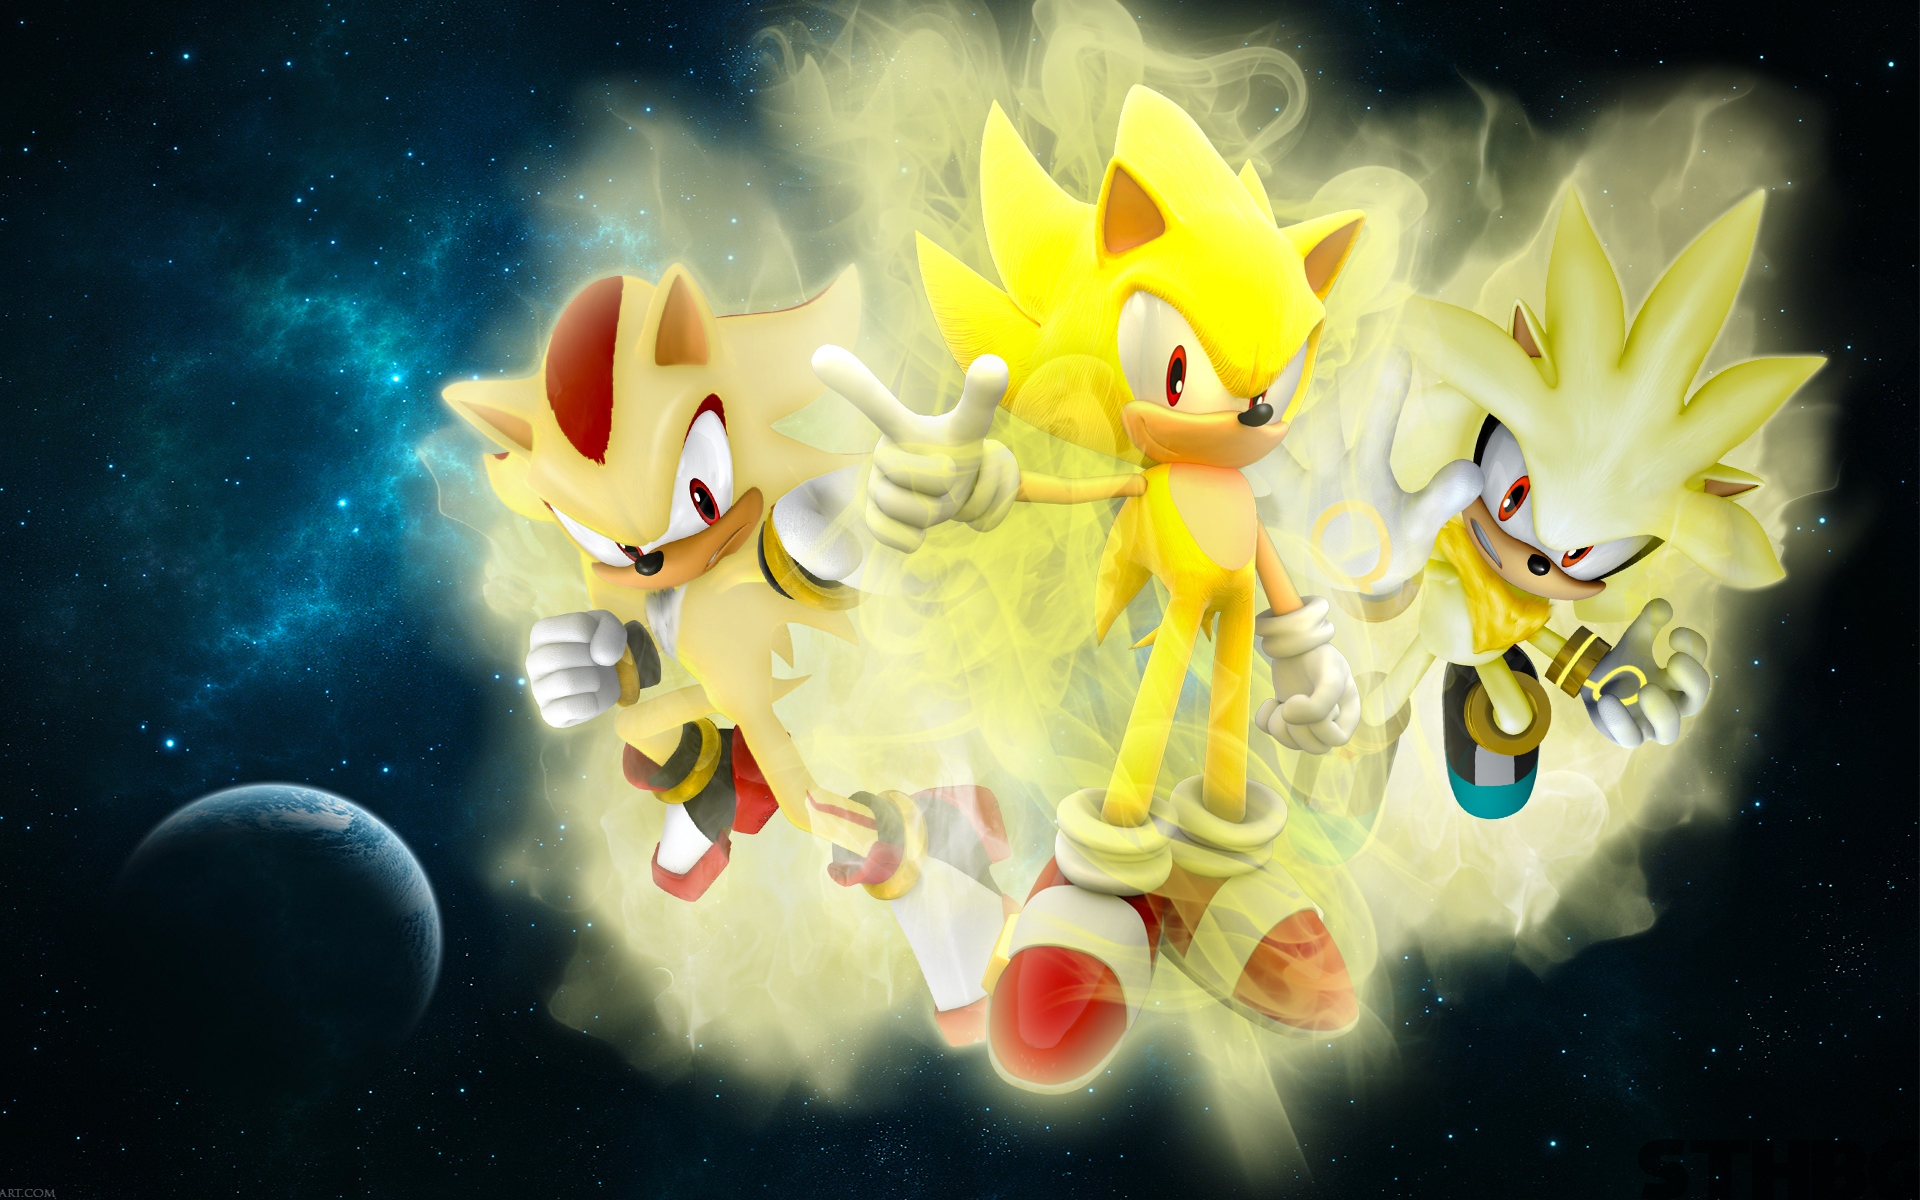 Super Sonic 4 Vs Super Shadow 4 Images amp Pictures   Becuo